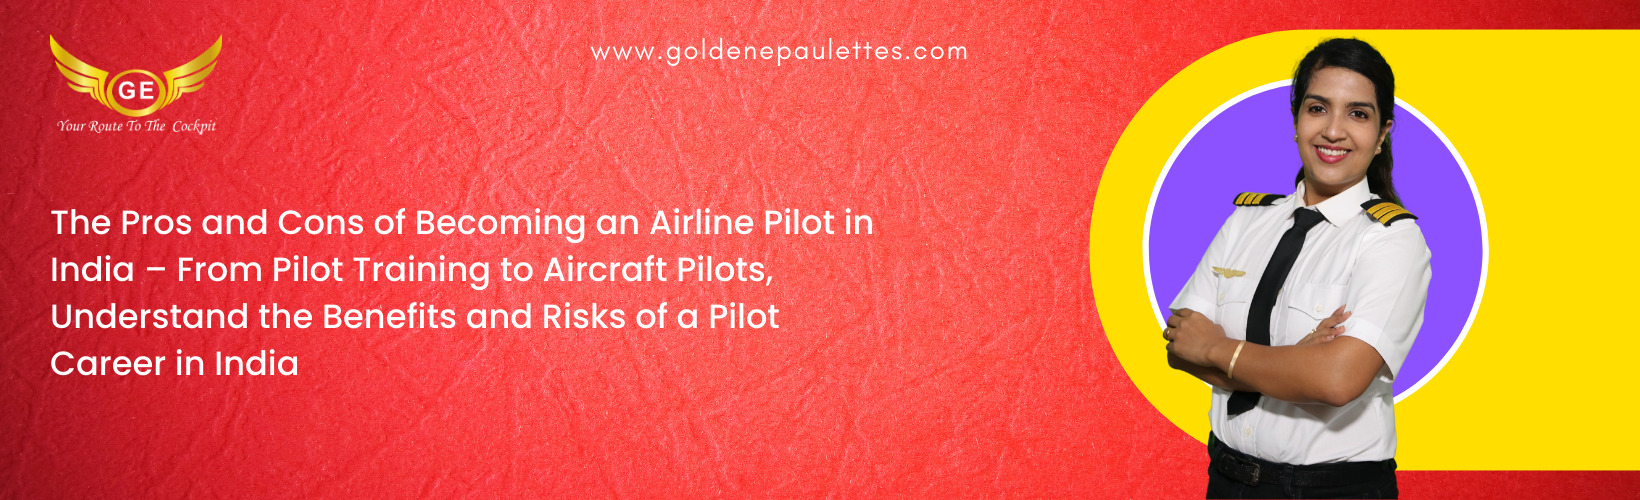 What You Need to Know About Airline Pilot Jobs in India – Airline pilot jobs are some of the most sought